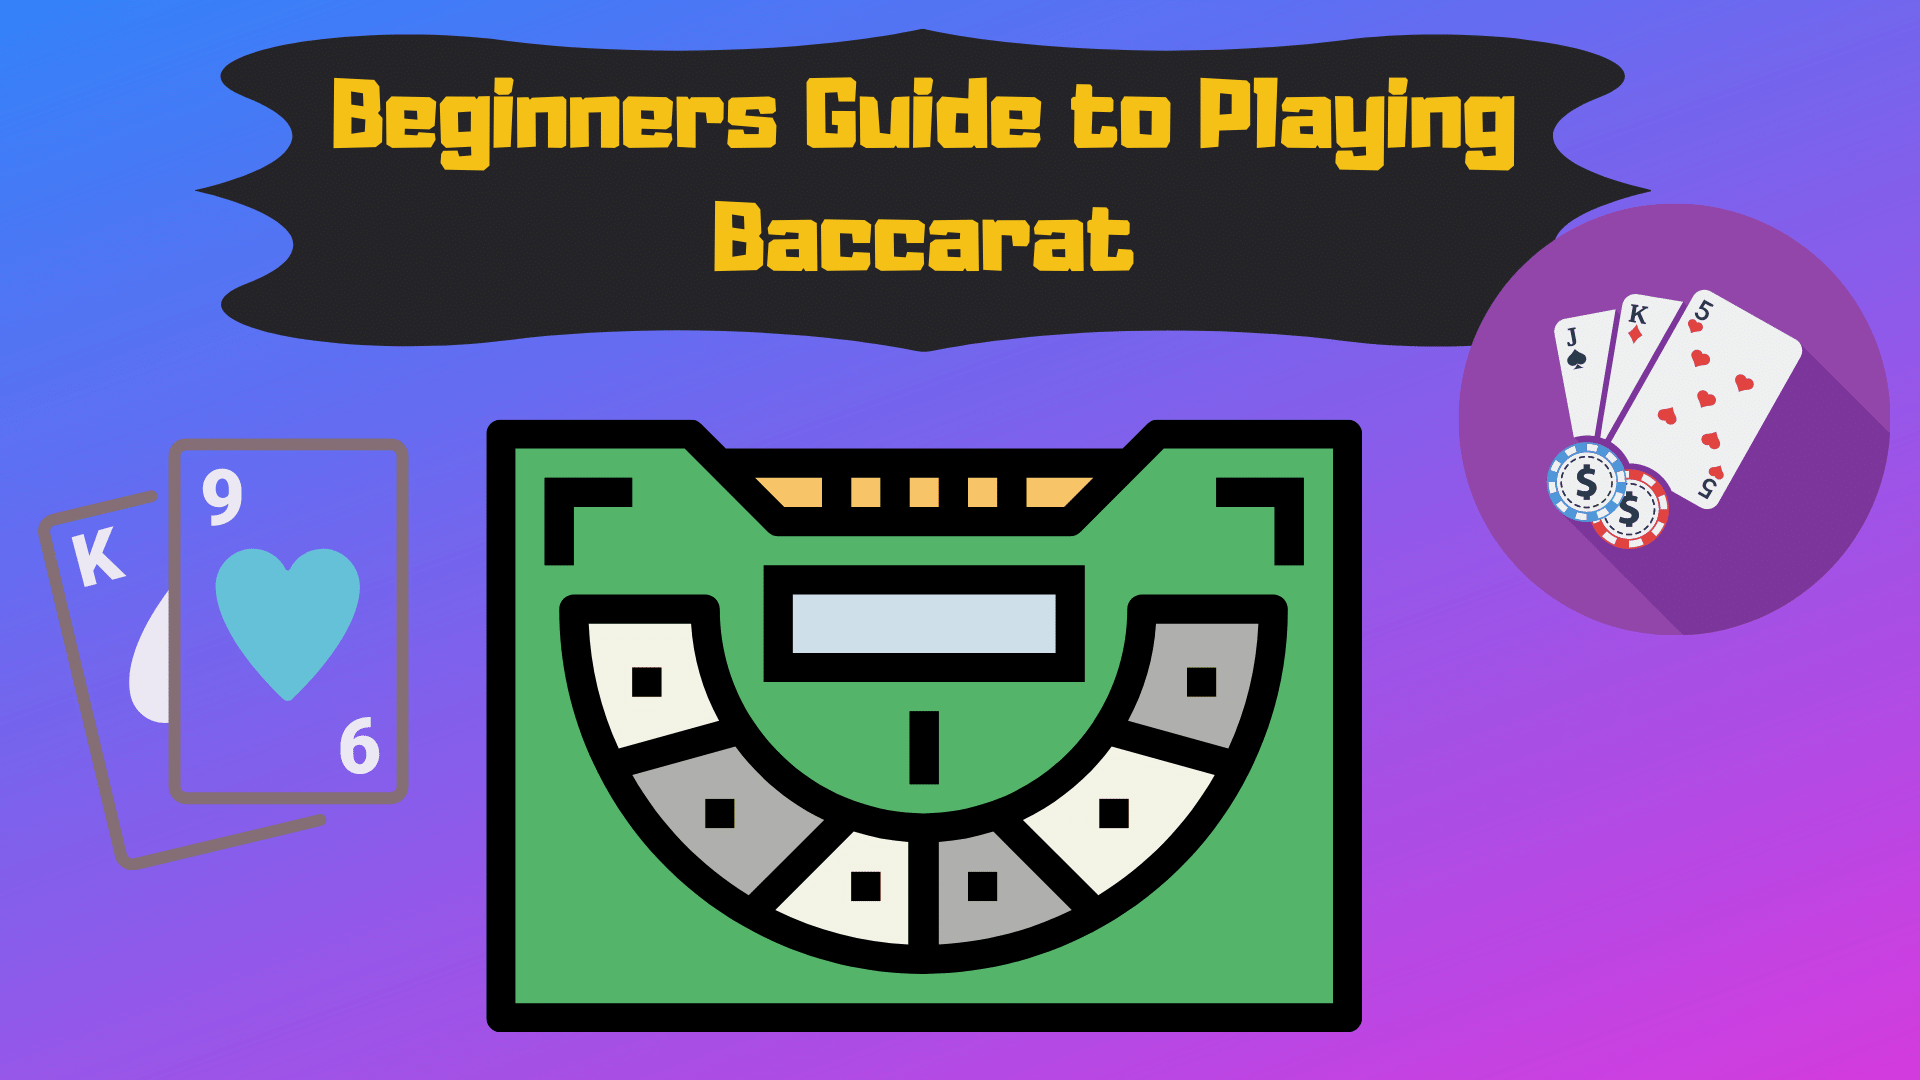 Beginners Guide To Playing Baccarat